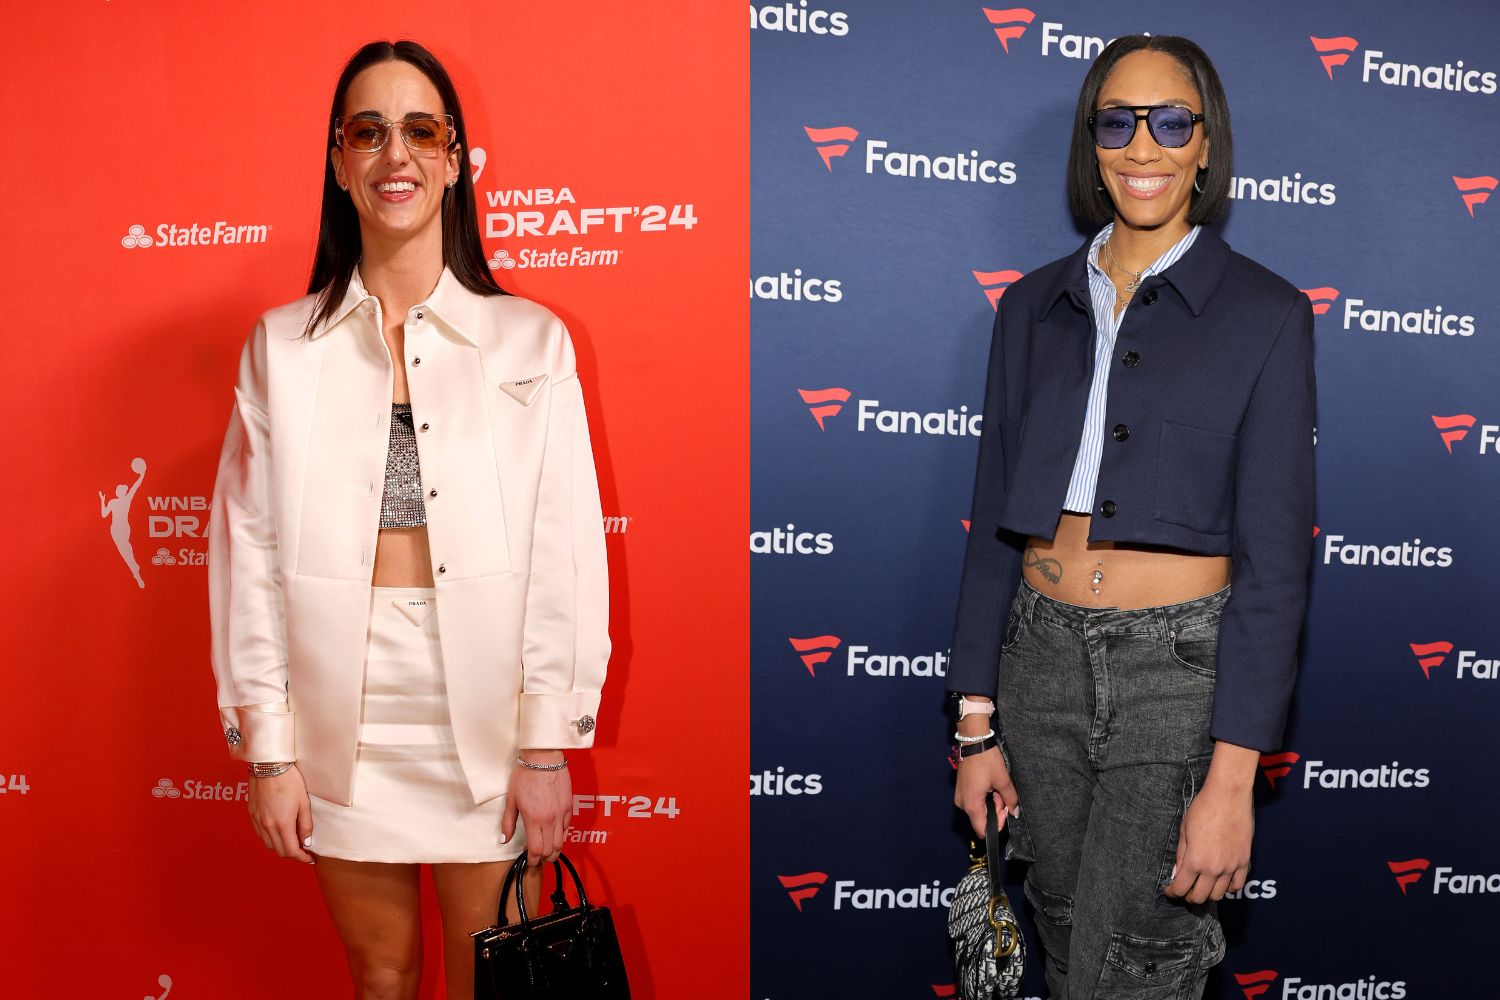 Social Media Reacts To Caitlin Clark Reportedly Having A Signature Nike Shoe Before WNBA Star A’ja Wilson